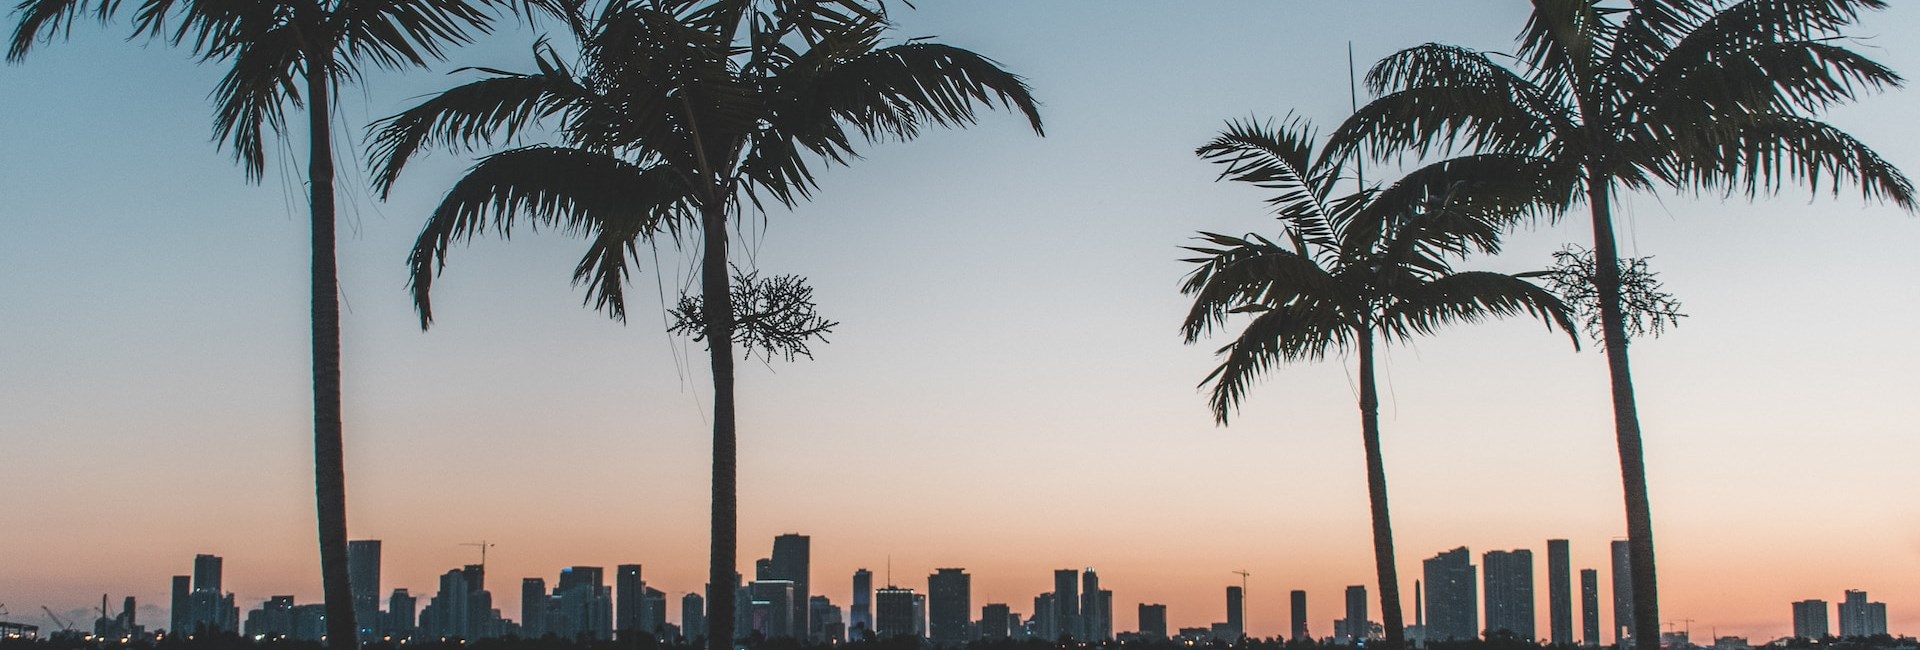 Miami beach with palm trees silhouetted by sunset